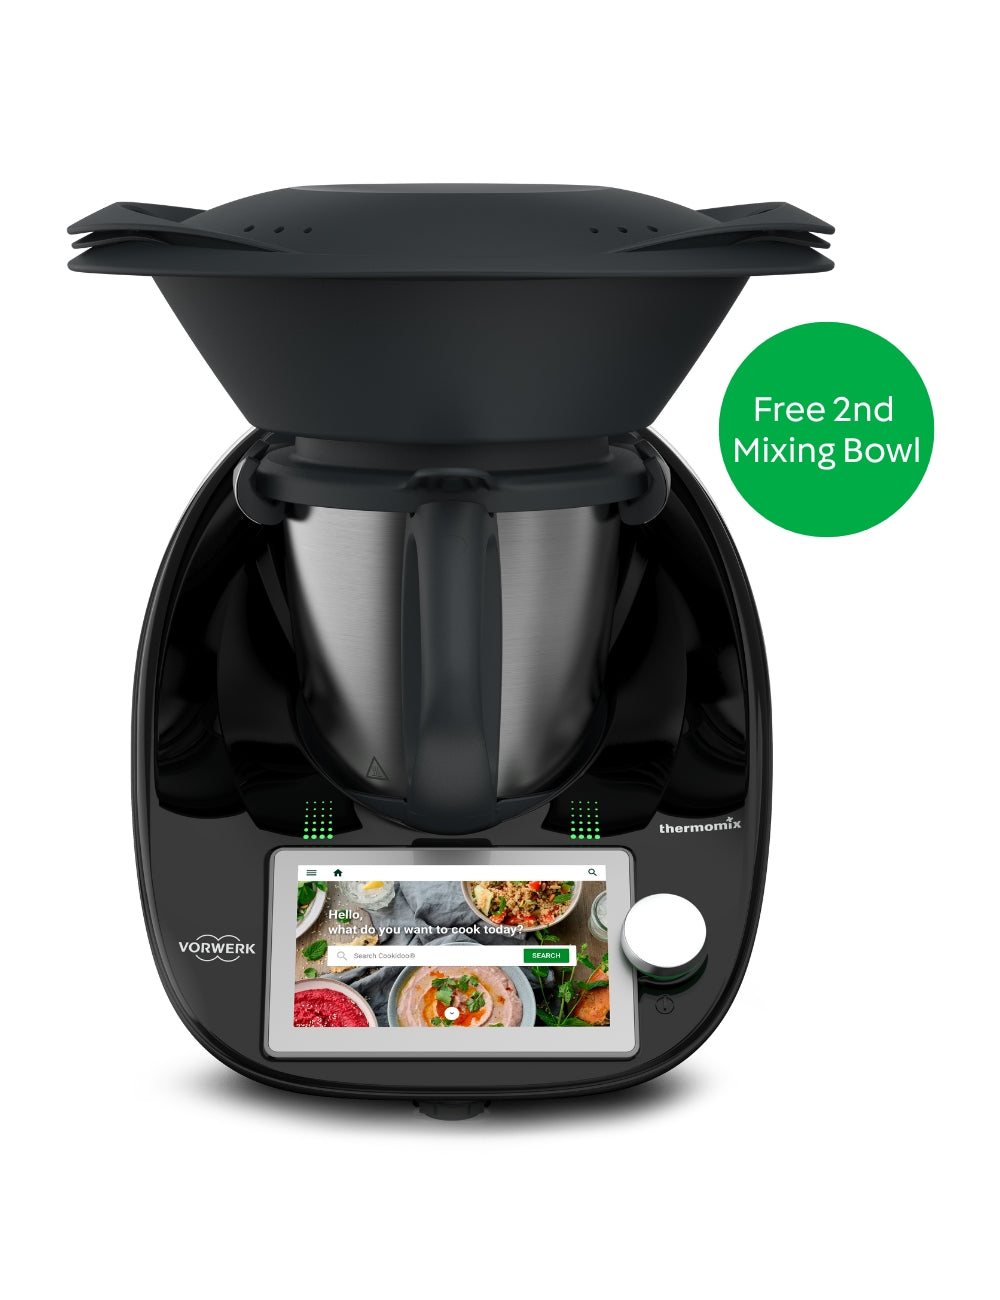 Shop Thermomix® USA | Visit the Official Thermomix® Store